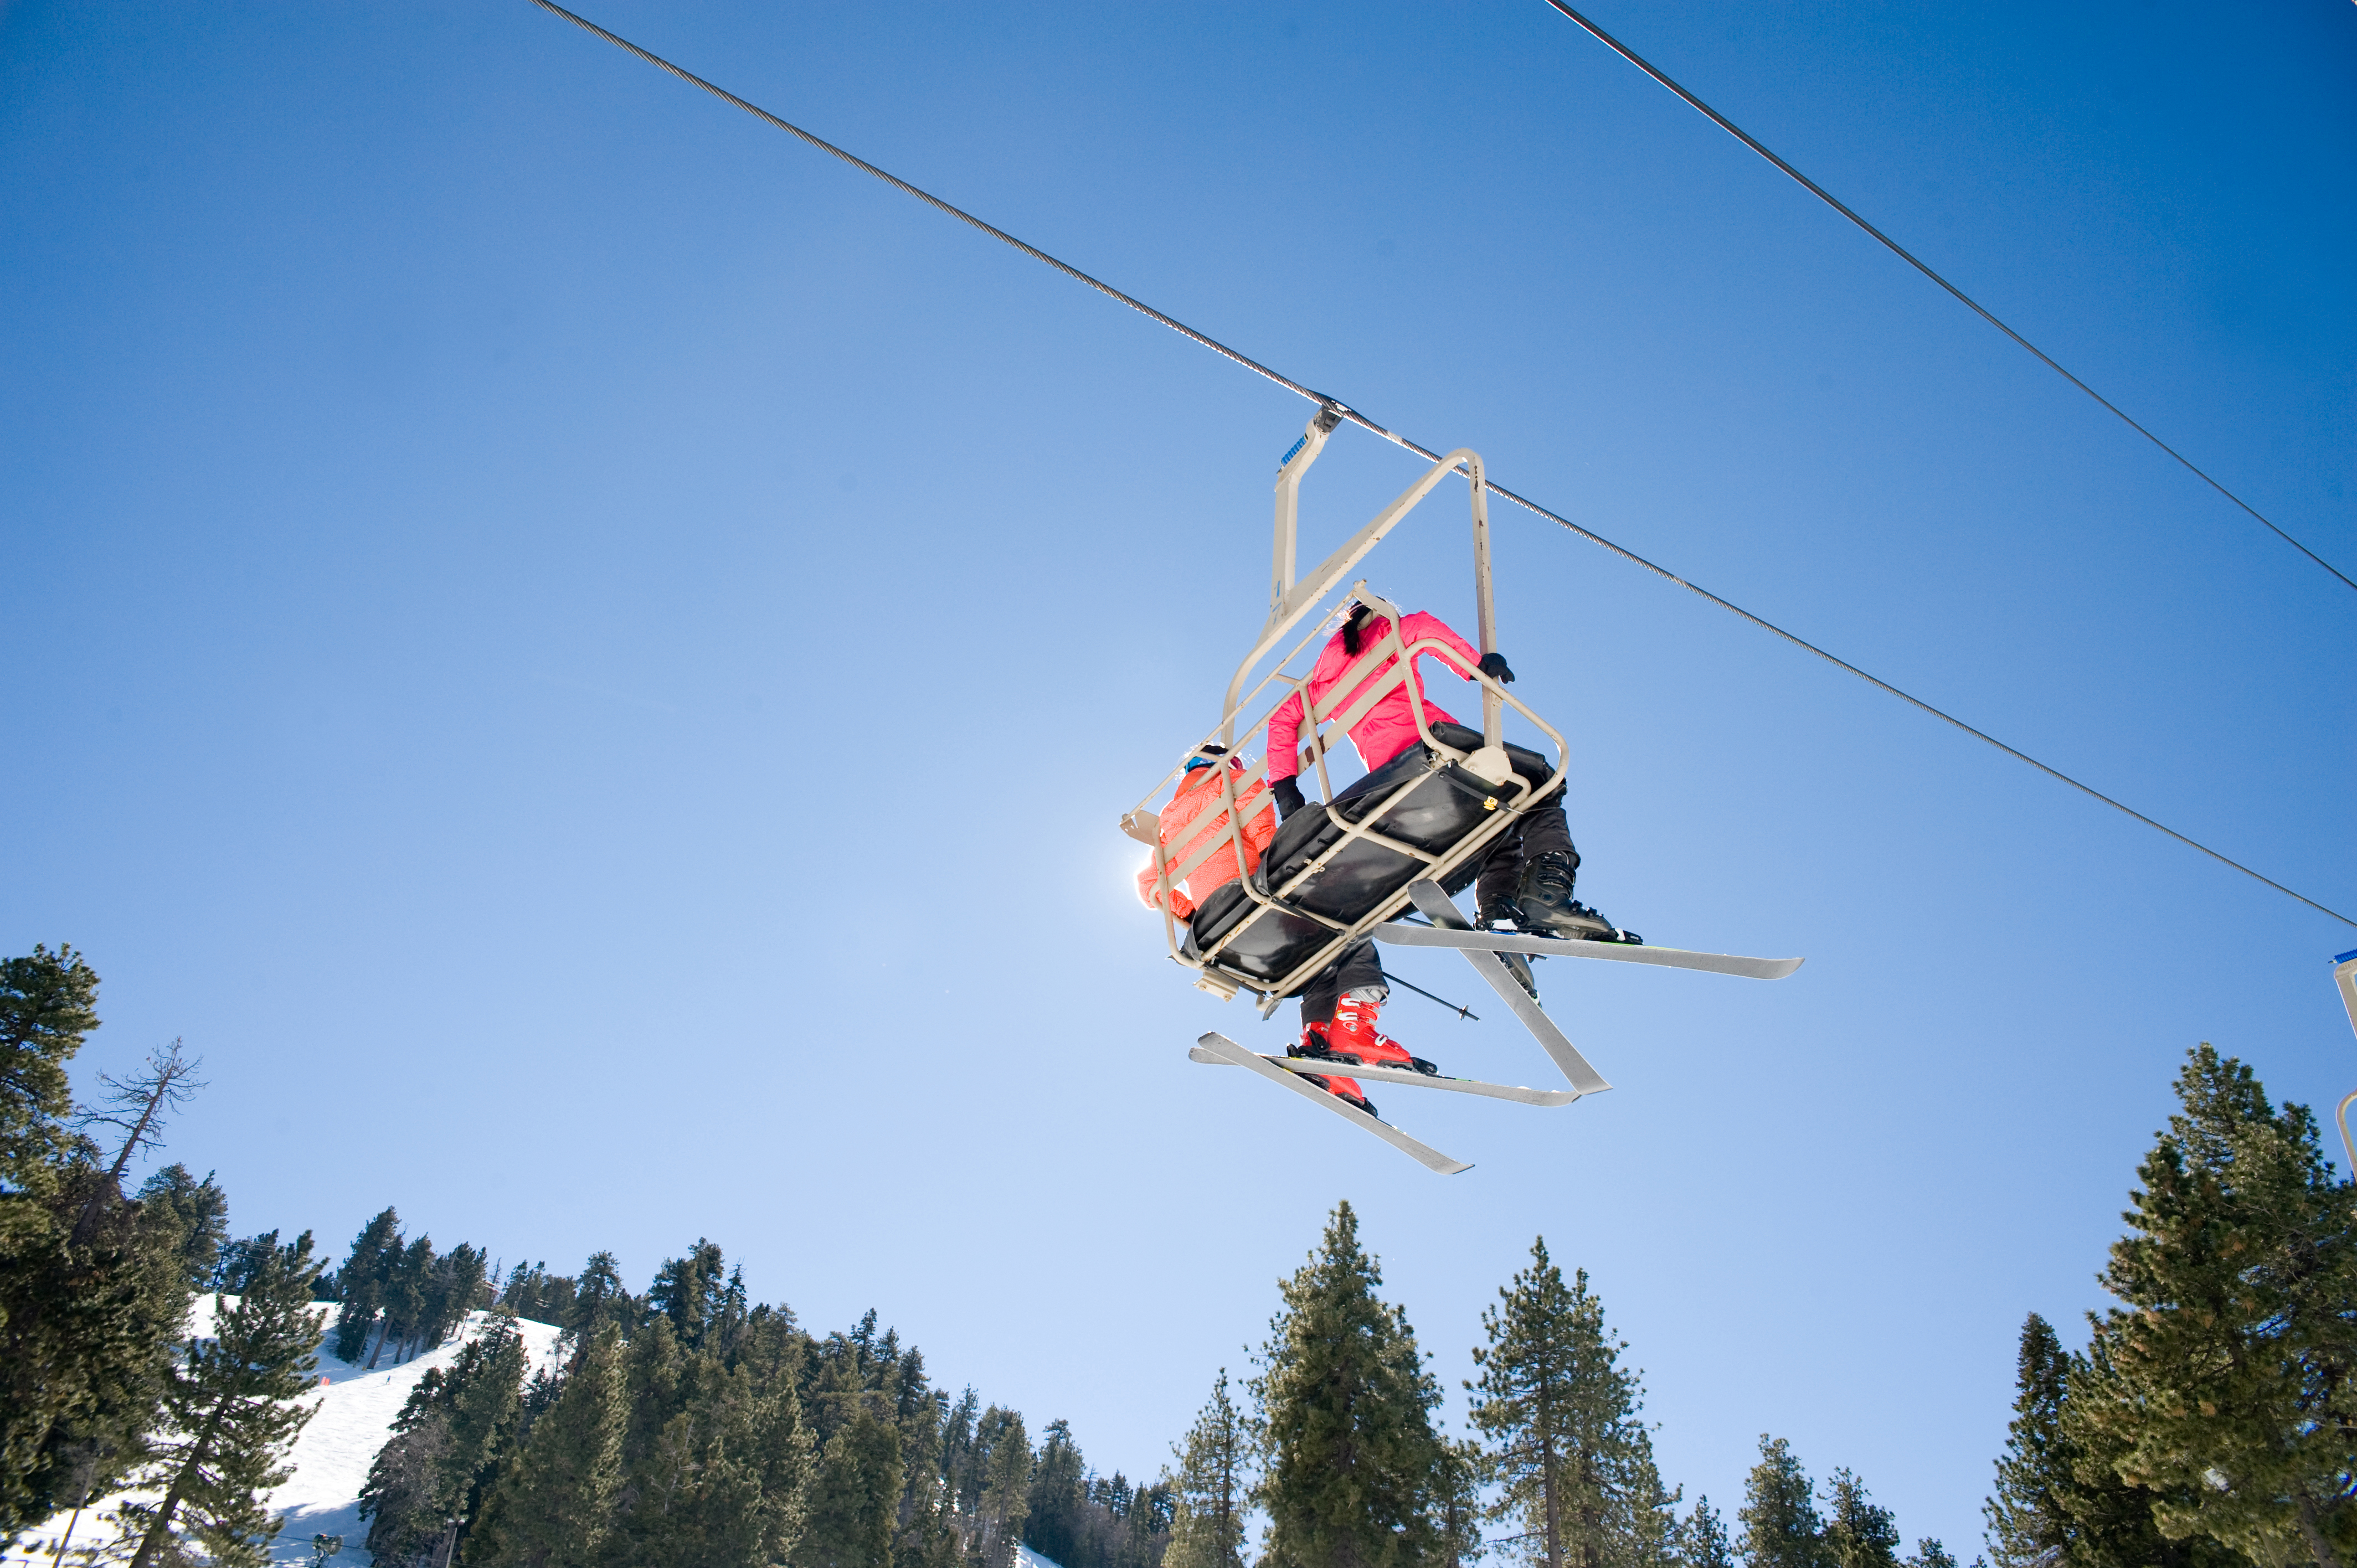 A Daring Rescue Saved A Boy Dangling From A Chairlift Time